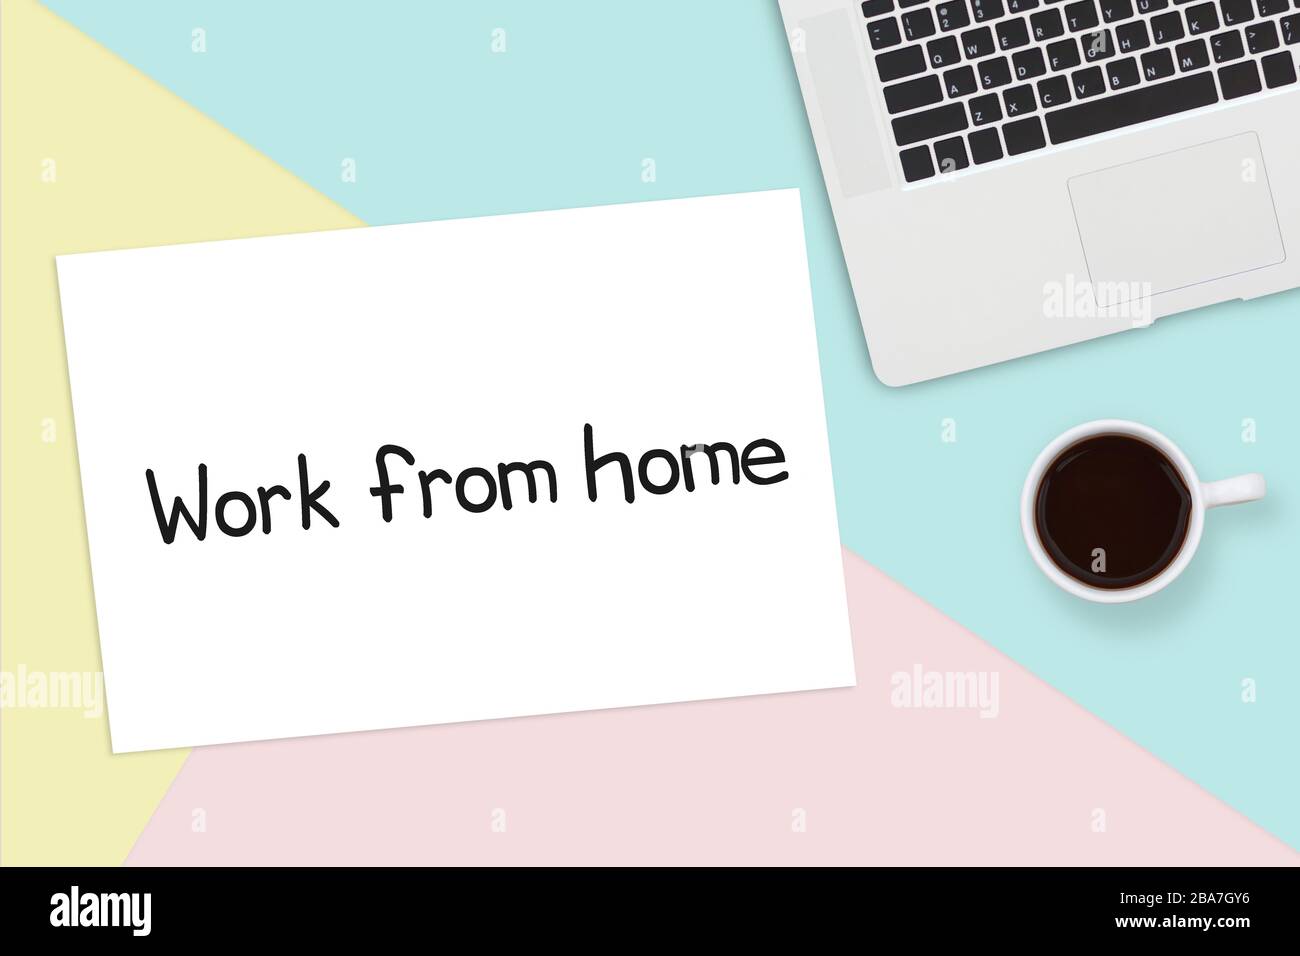 work from home concept. notebook laptop computer and a cup of coffee on office desk table, paper with text work from home on copy space Stock Photo